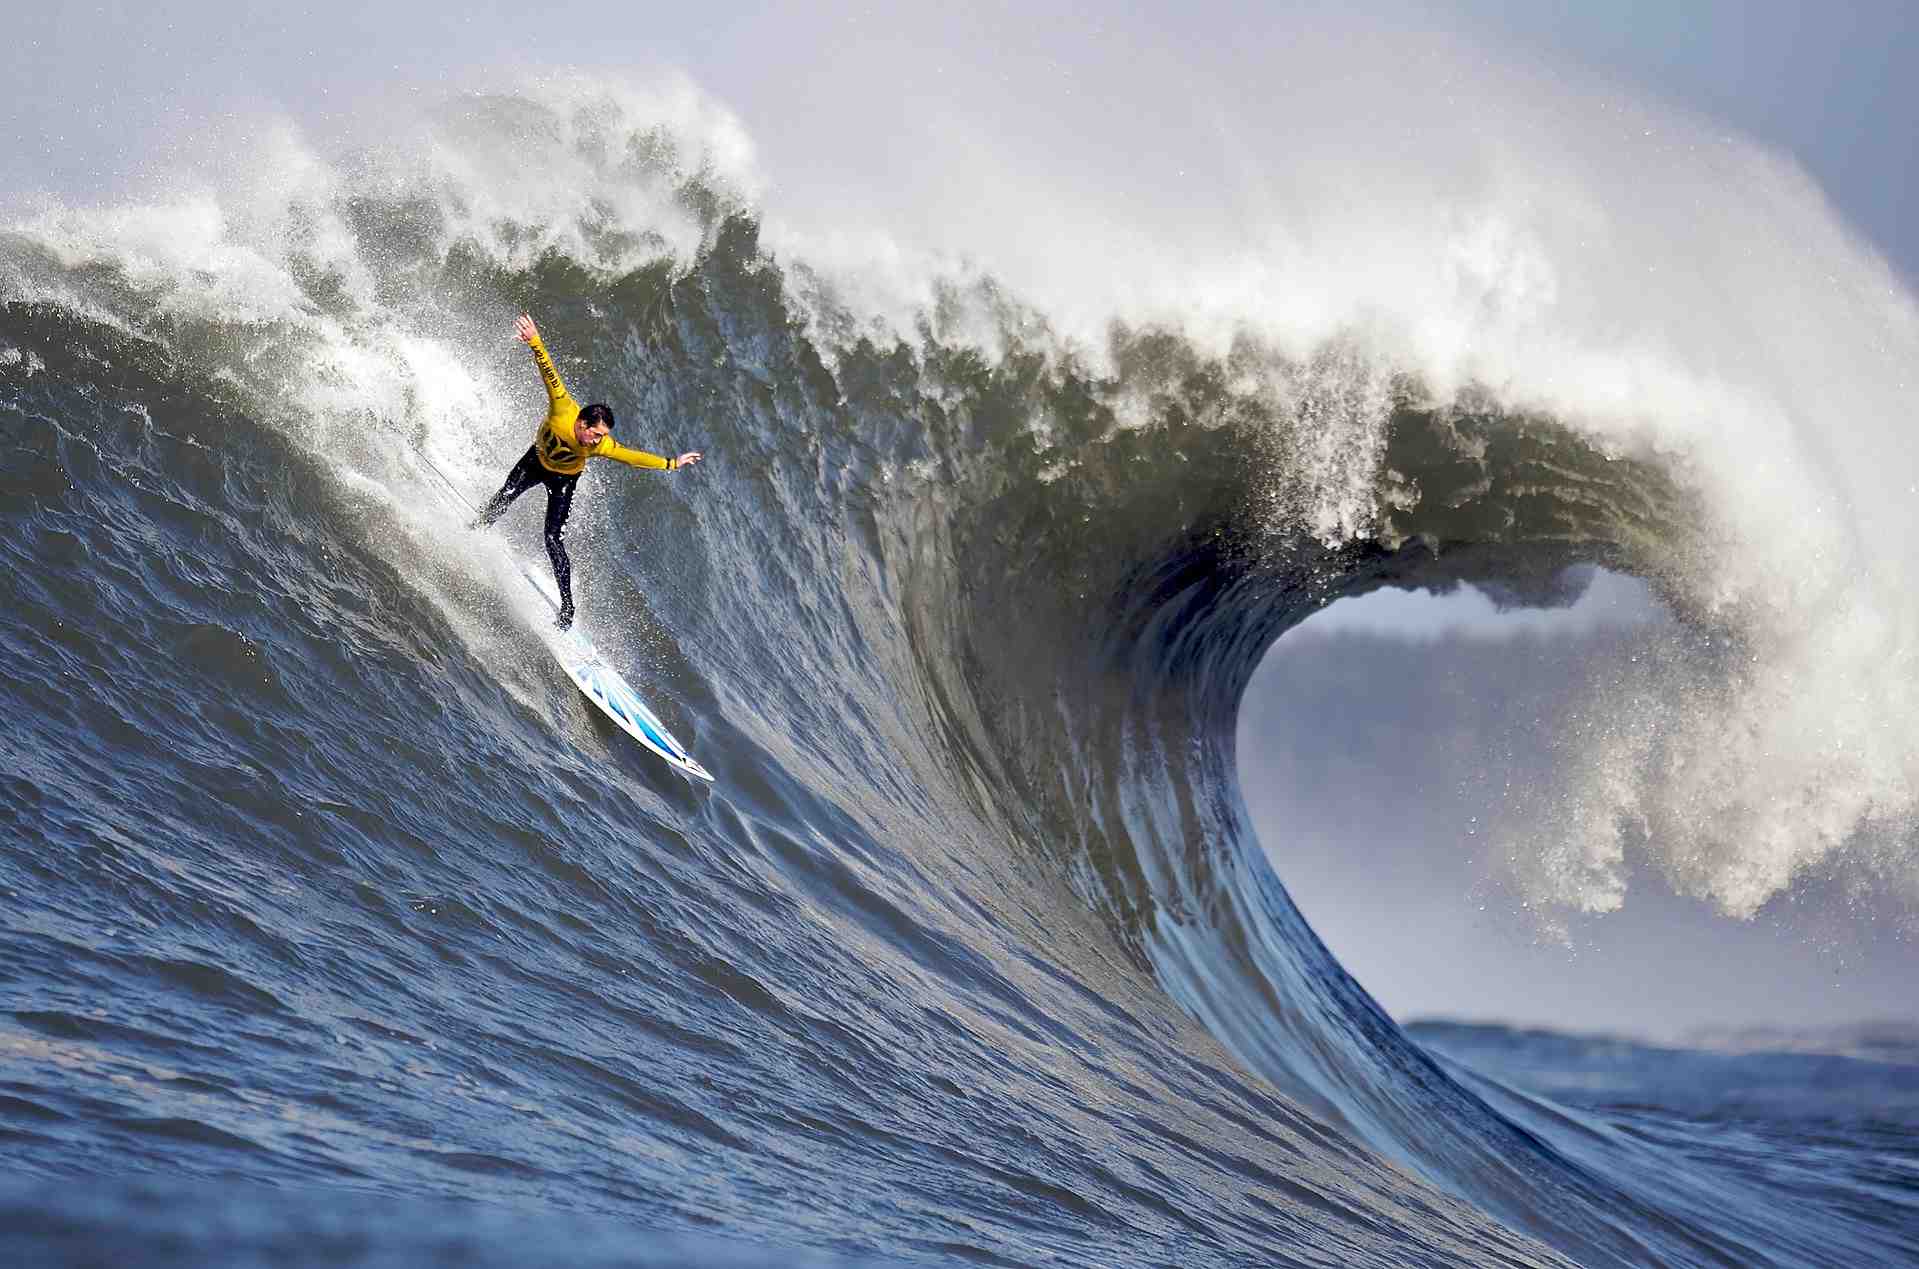 Who invented surfing?